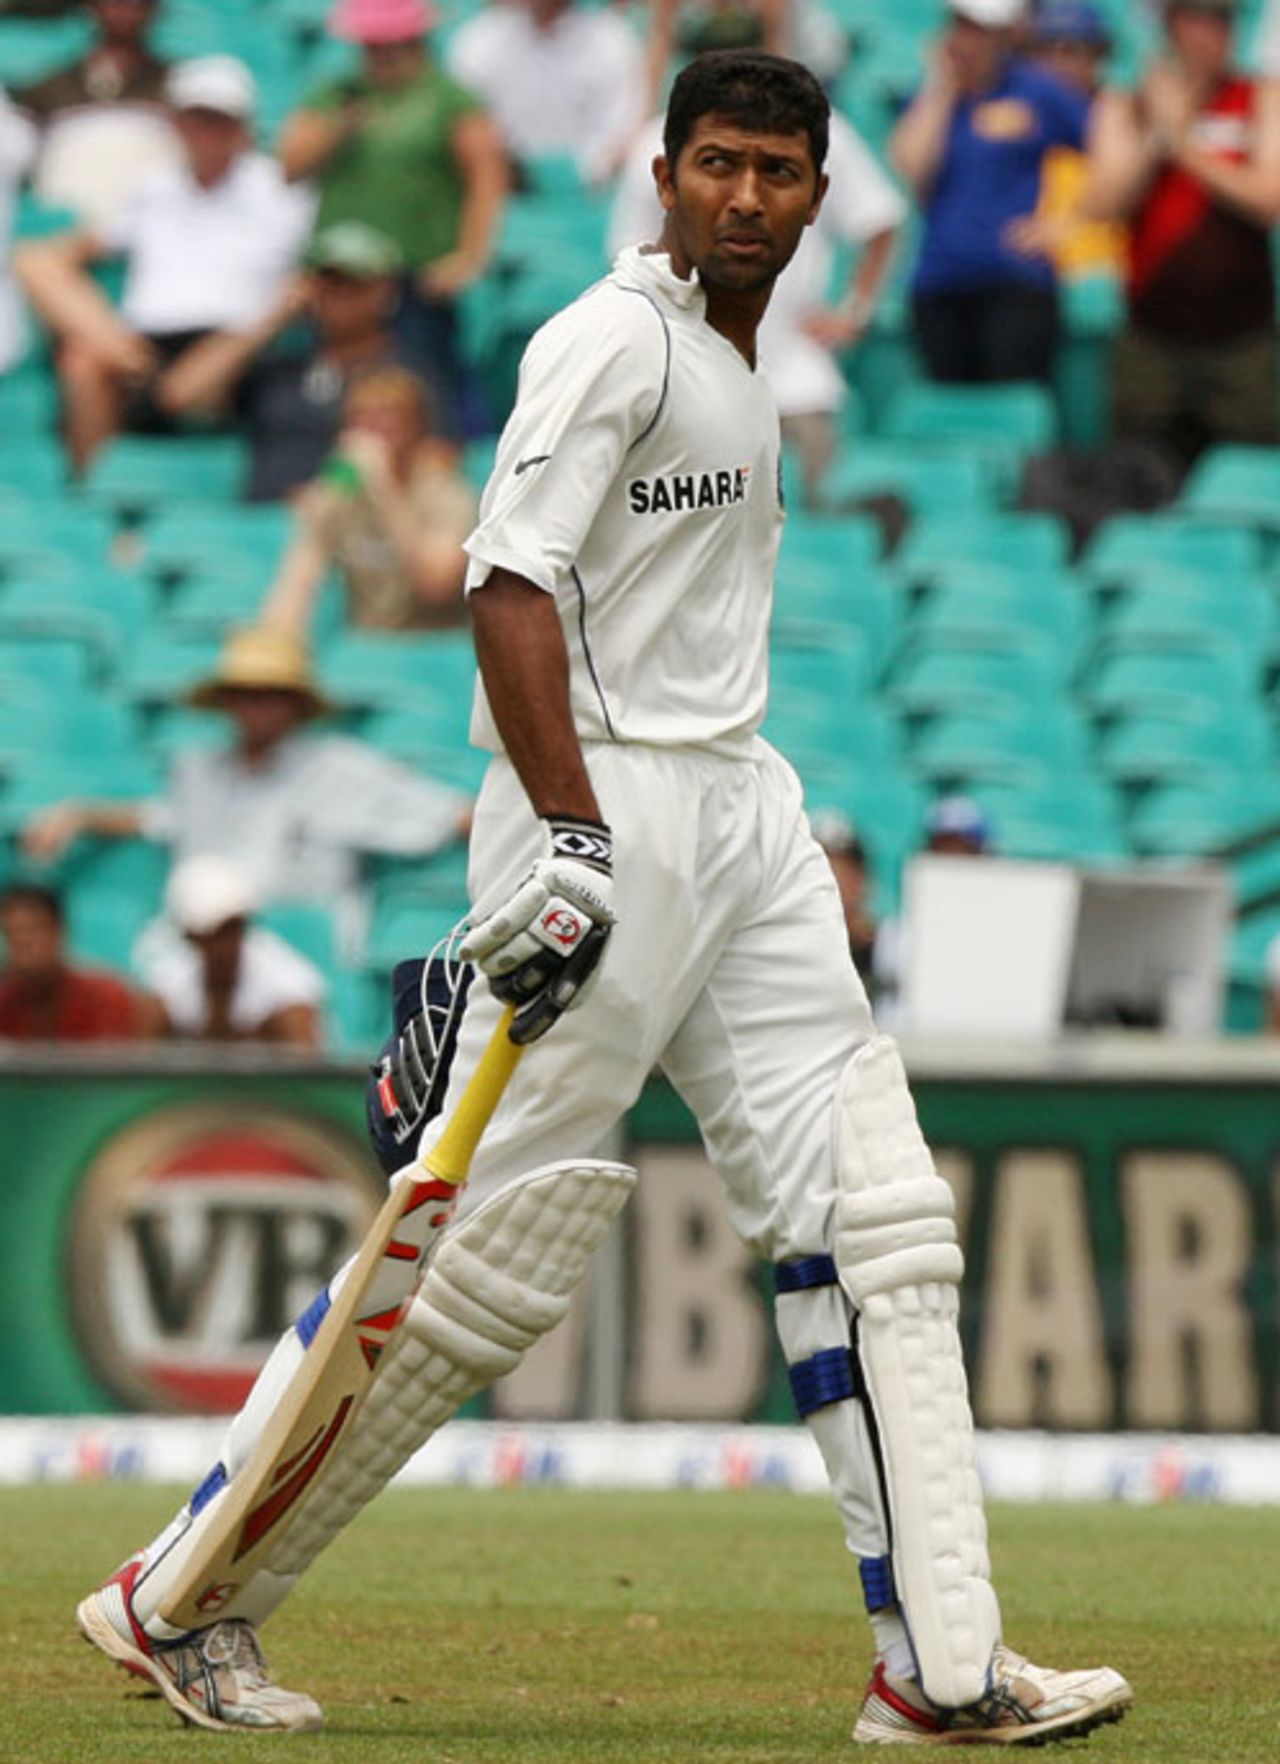 Wasim Jaffer was dismissed for a duck, Australia v India, 2nd Test, Sydney, 5th day, January 6, 2008